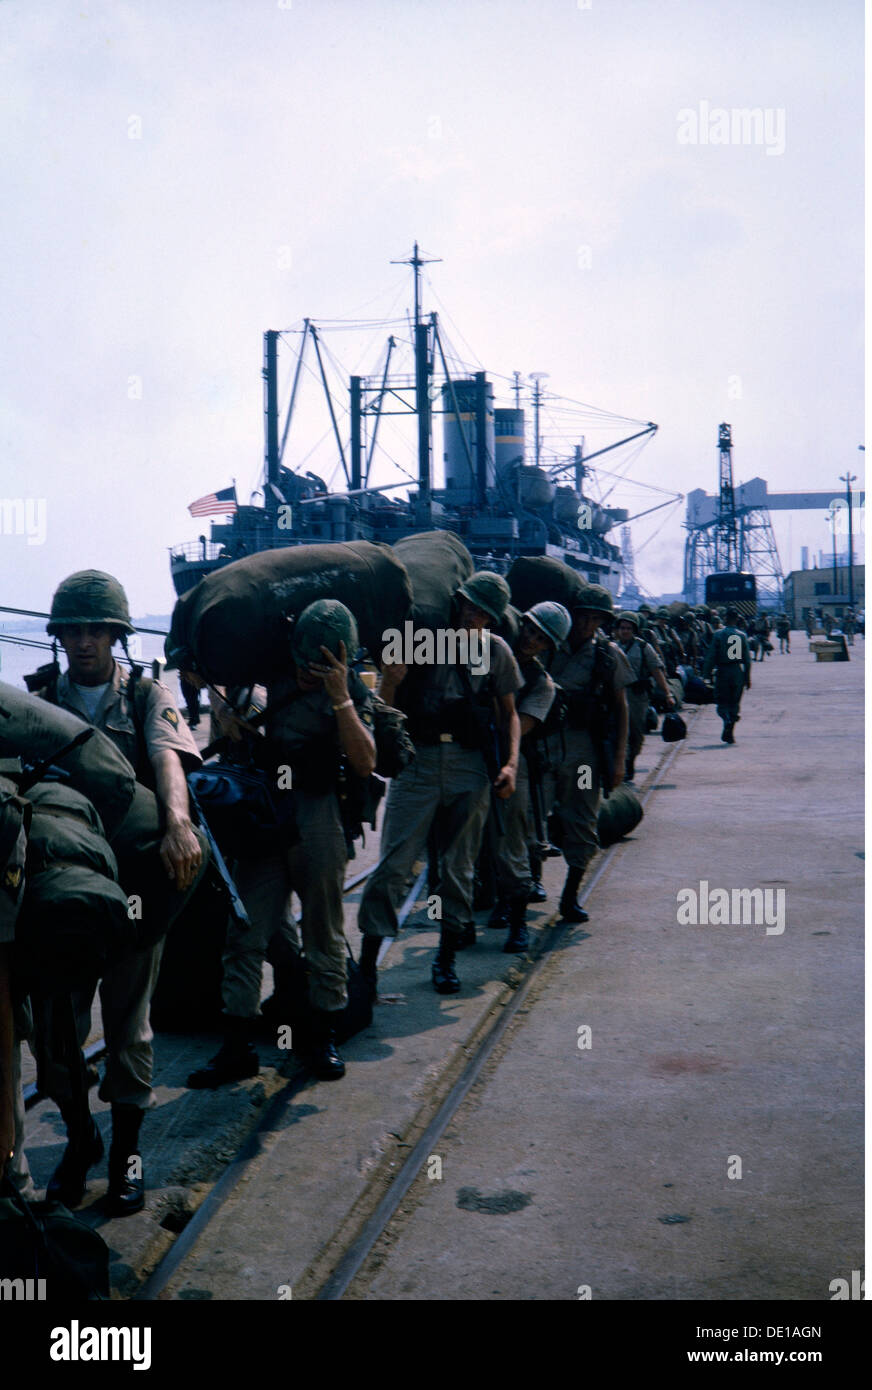 Vietnam War 1957 - 1975,arrival of American soldiers,South Vietnam,1965,harbour,harbor,harbours,harbors,port,ports,ship,ships,baggage,luggage,duffle bag,duffel bag,duffel,duffle,kit bag,duffle bags,duffel bags,duffels,duffles,kit bags,embankment,pier,military,armed forces,army,armies,USA,United States of America,South-East Asia,South East Asia,Southeast Asia,Far East,Viet Nam conflict,Viet Nam,Vietnam,war,wars,conflict,conflicts,1960s,60s,20th century,people,group,groups,men,man,male,soldiers,soldier,histori,Additional-Rights-Clearences-Not Available Stock Photo